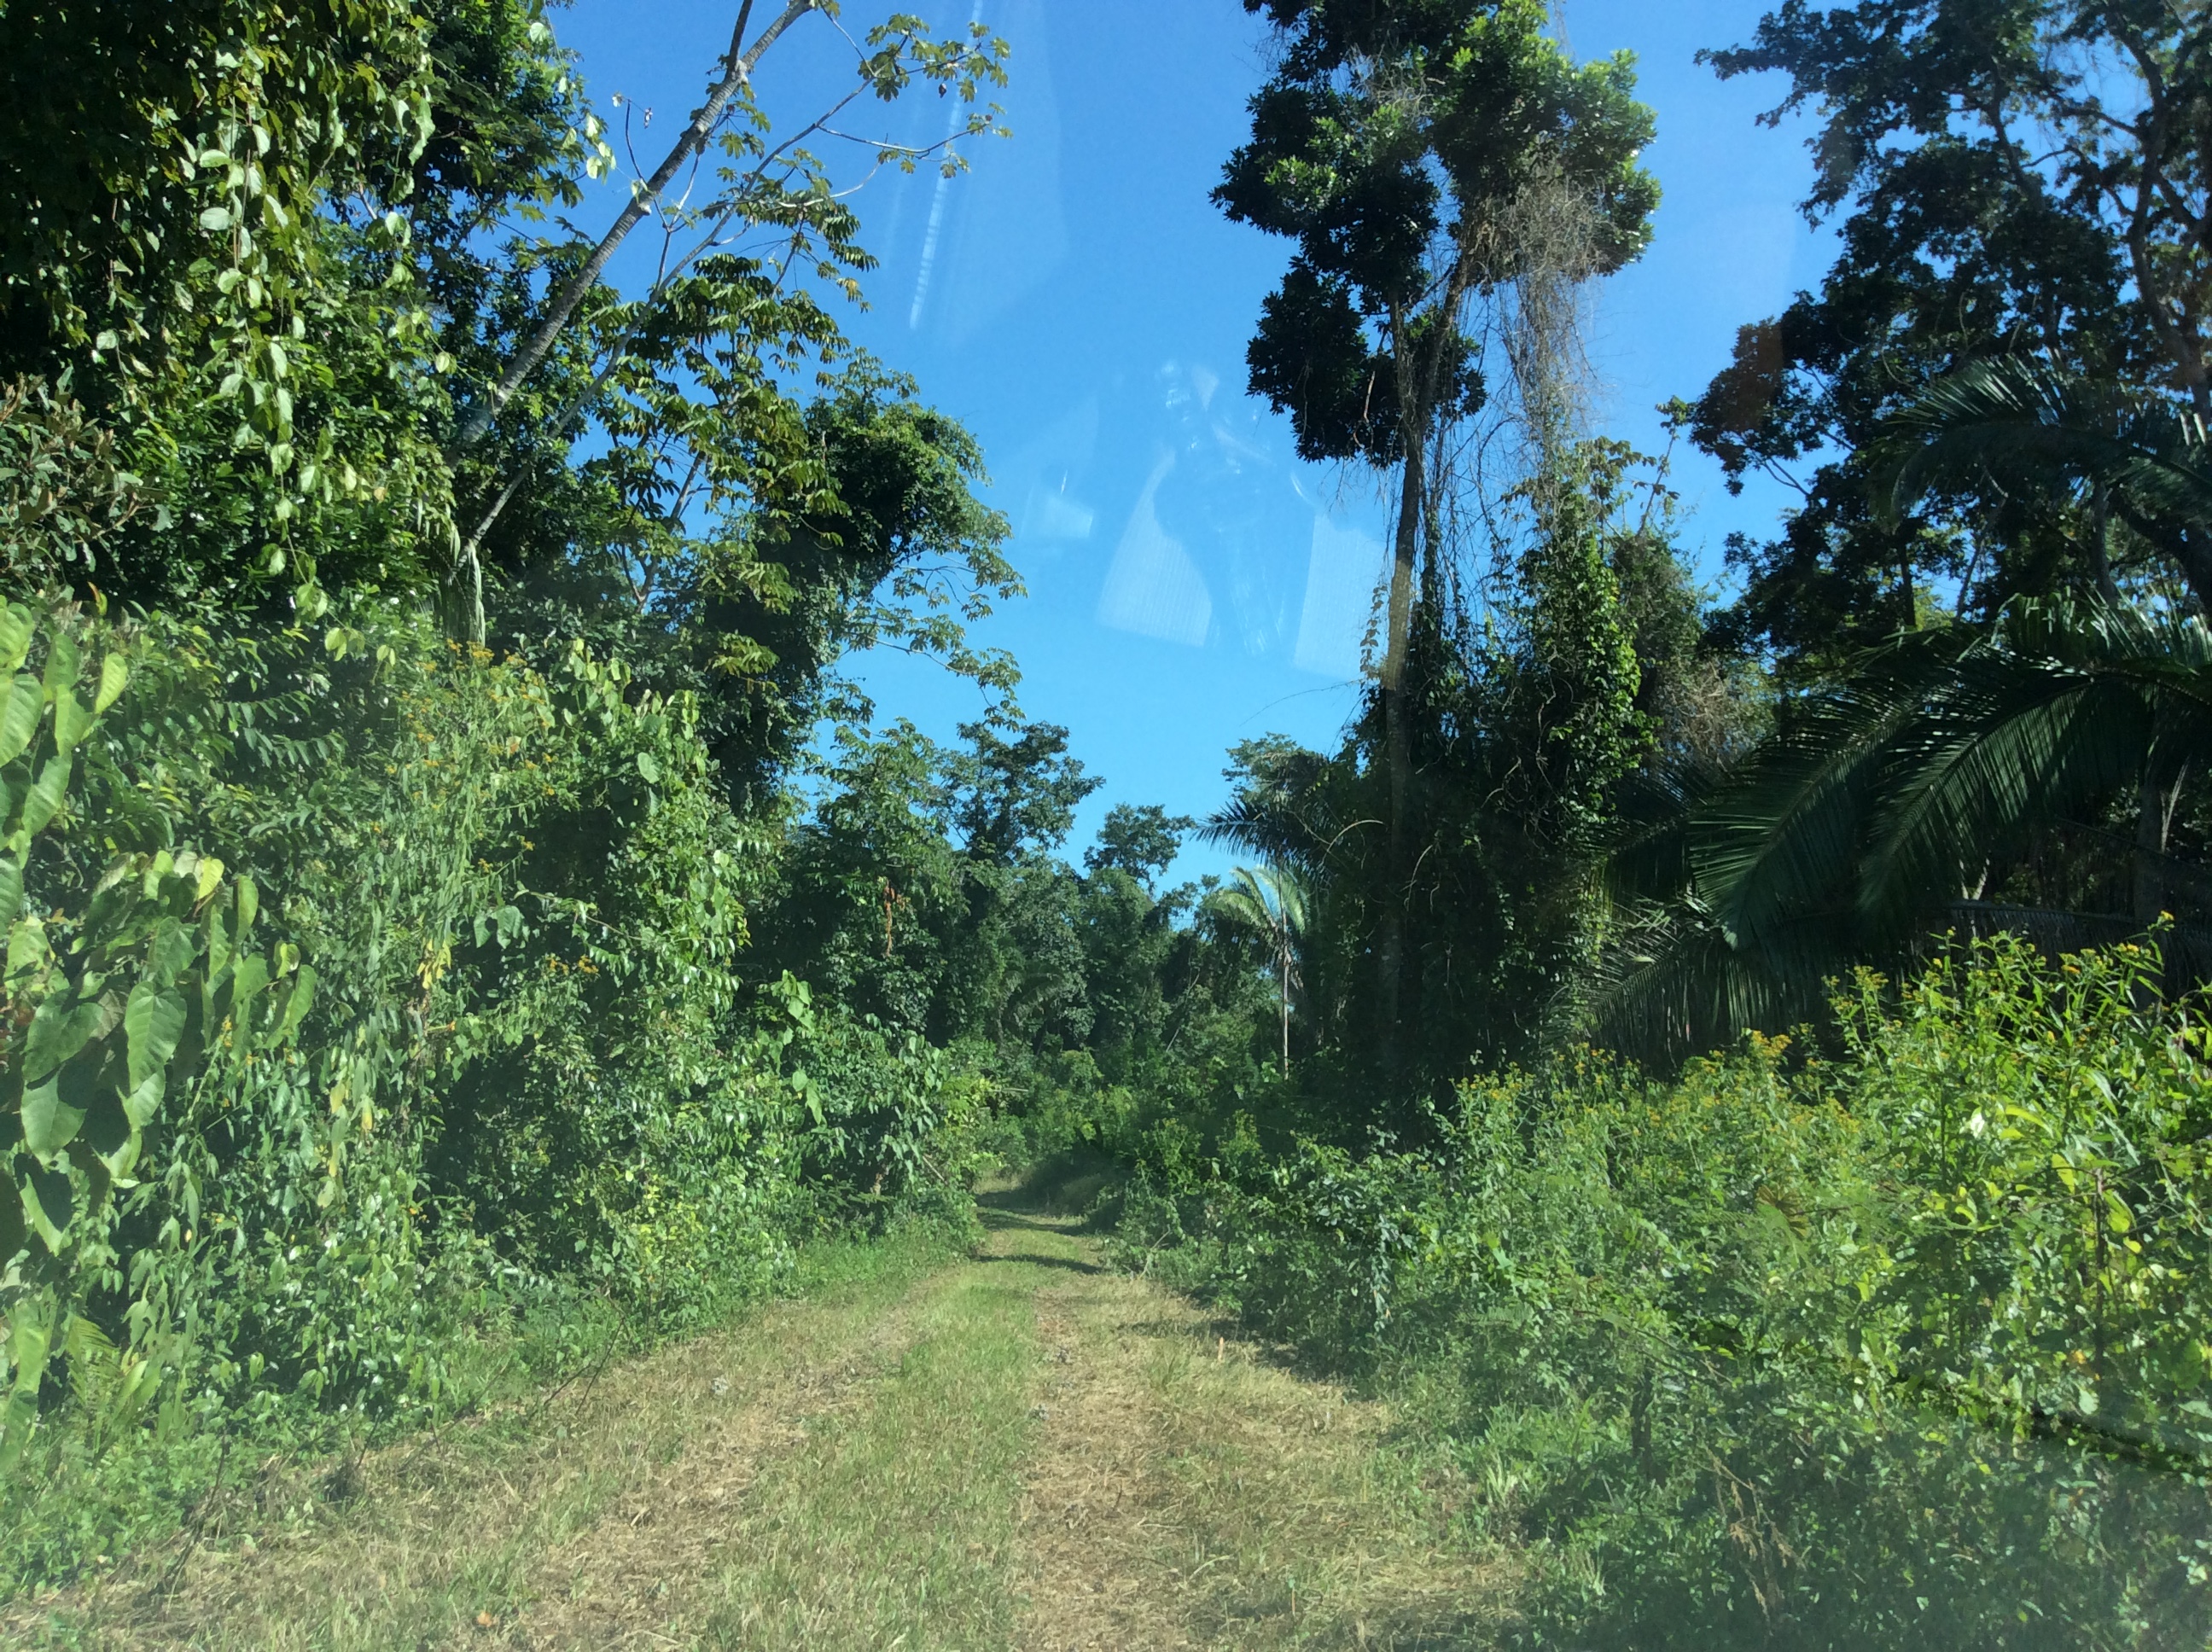 February 2015 - The road into Mayacan